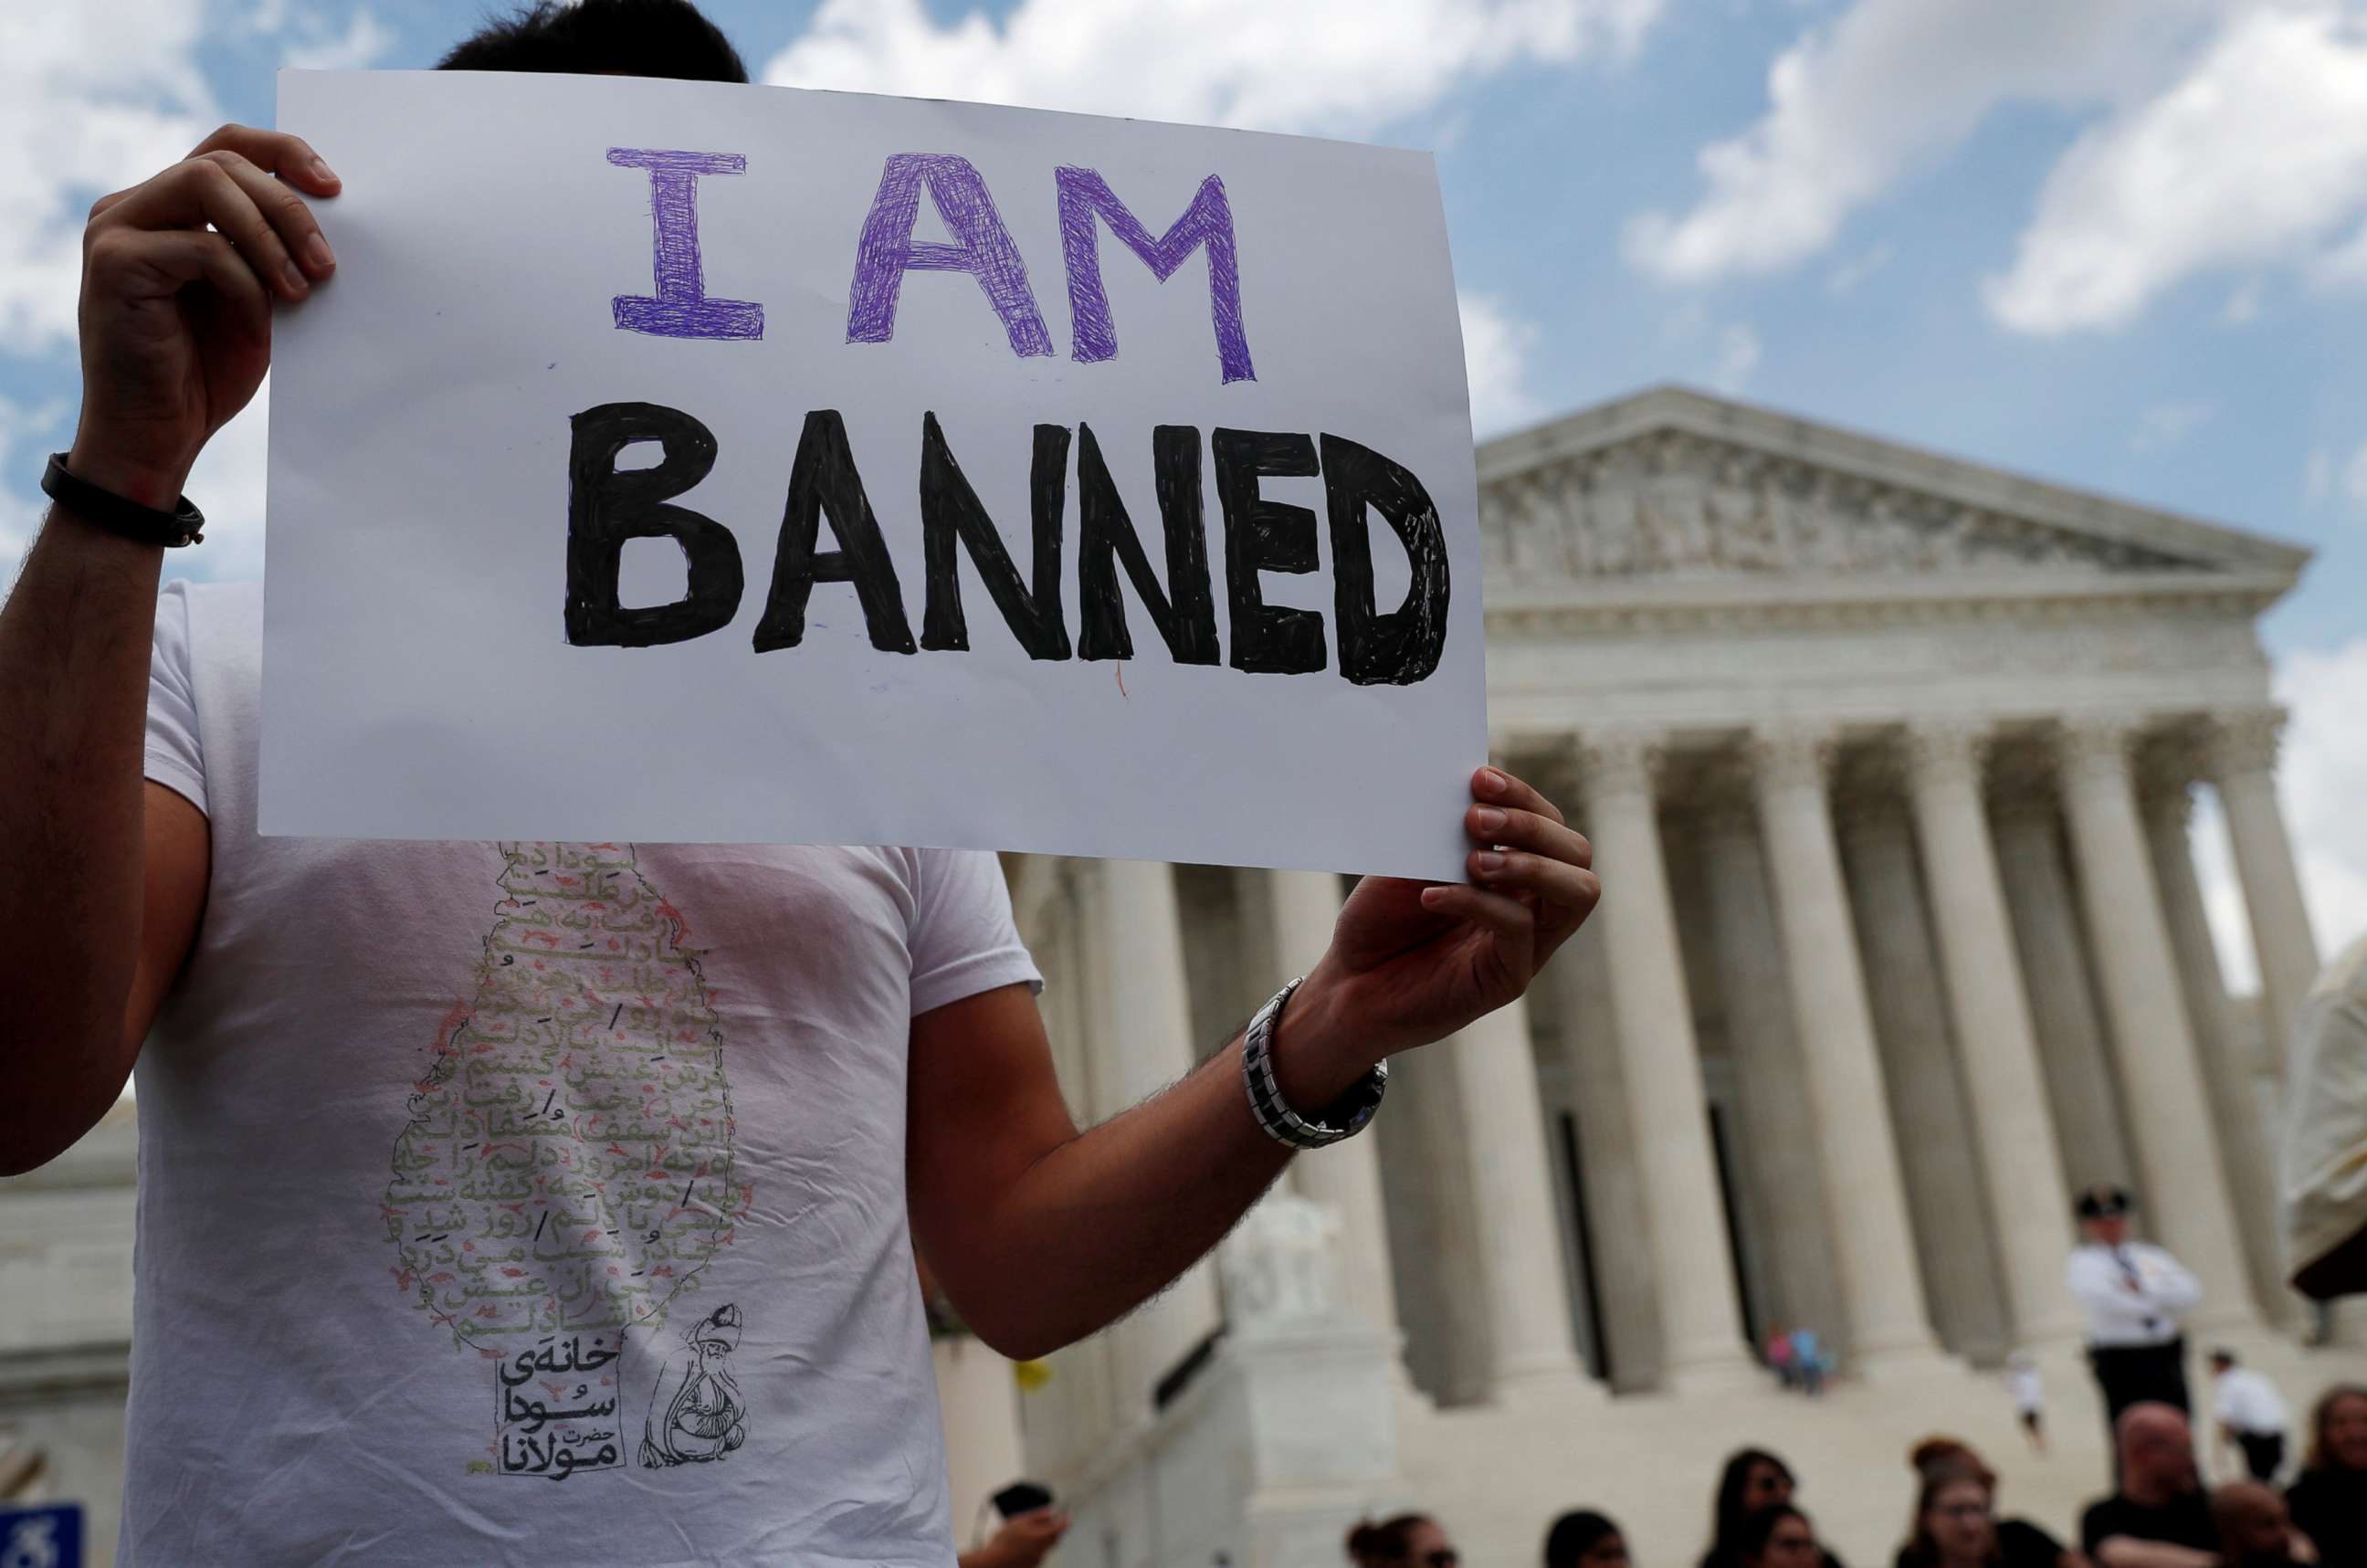 PHOTO: Mehrad Ansari of Iran holds a sign outside of the U.S. Supreme Court after U.S. President Trump's travel ban was upheld in Washington, D.C., June 26, 2018.